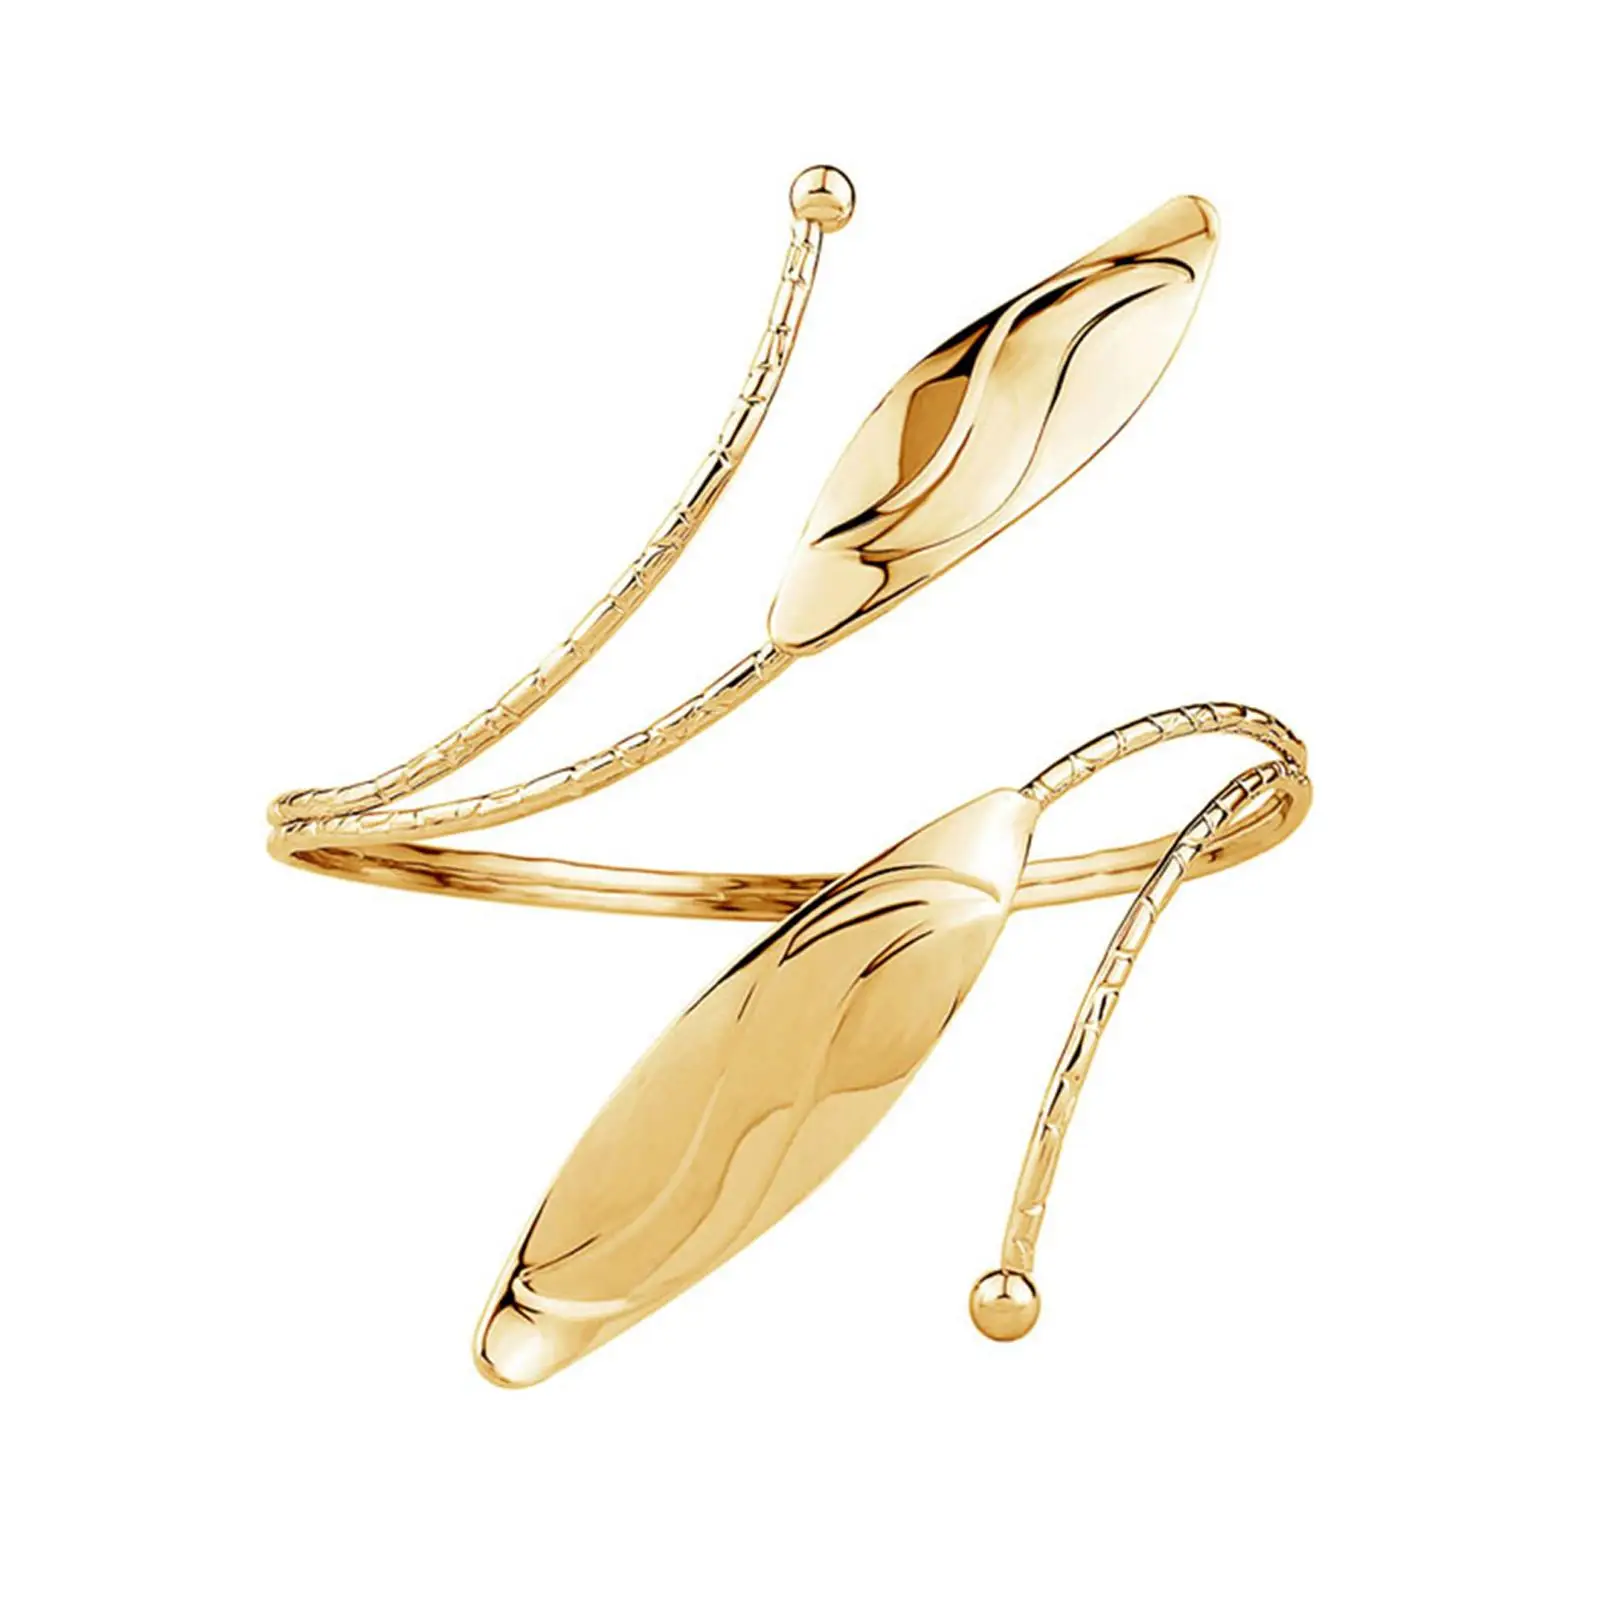 Rm Cuff Upper Rm B Cuff Brcelets for Women  Djustble Open Coil Rmlet Rmb Bngle Brcelet Costume Jewelry